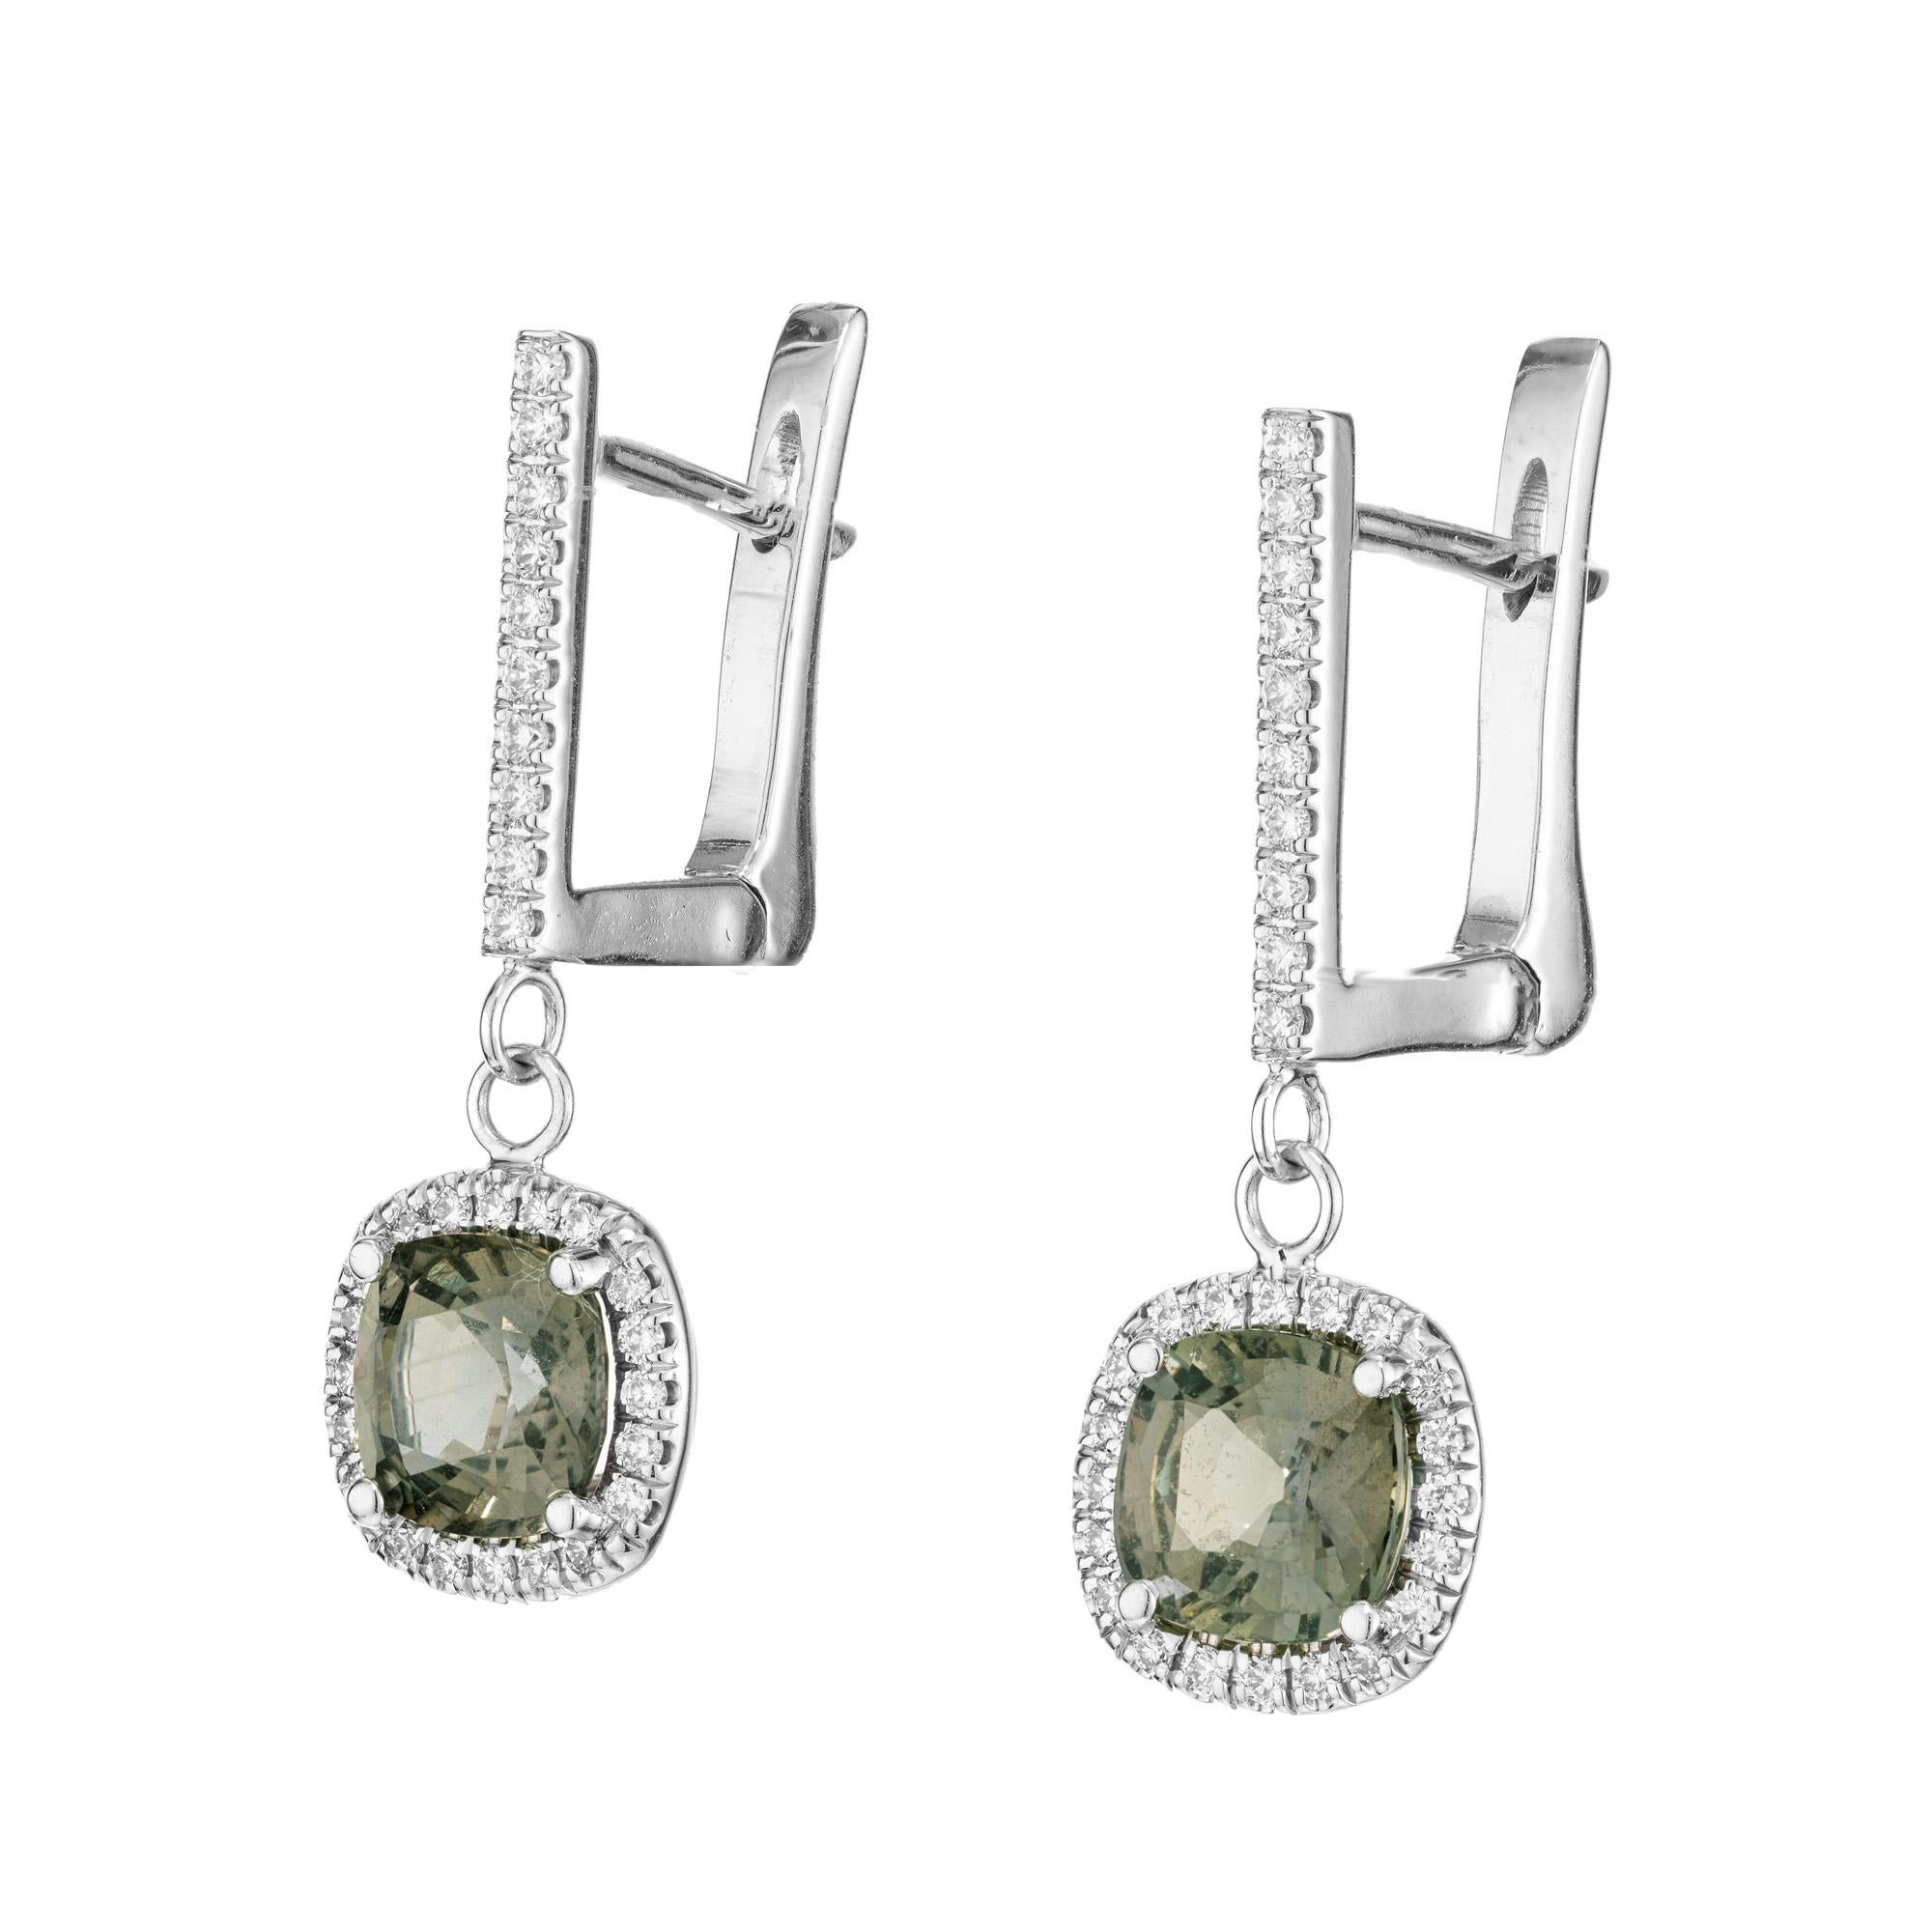 Step into elegance with these rare Peter Suchy sapphire and diamond dangle earrings. 2 cushion cut green and purple, bluish, green and purple sapphires. certified by the GIA as natural, no heat, and change color different lights. with a total carat